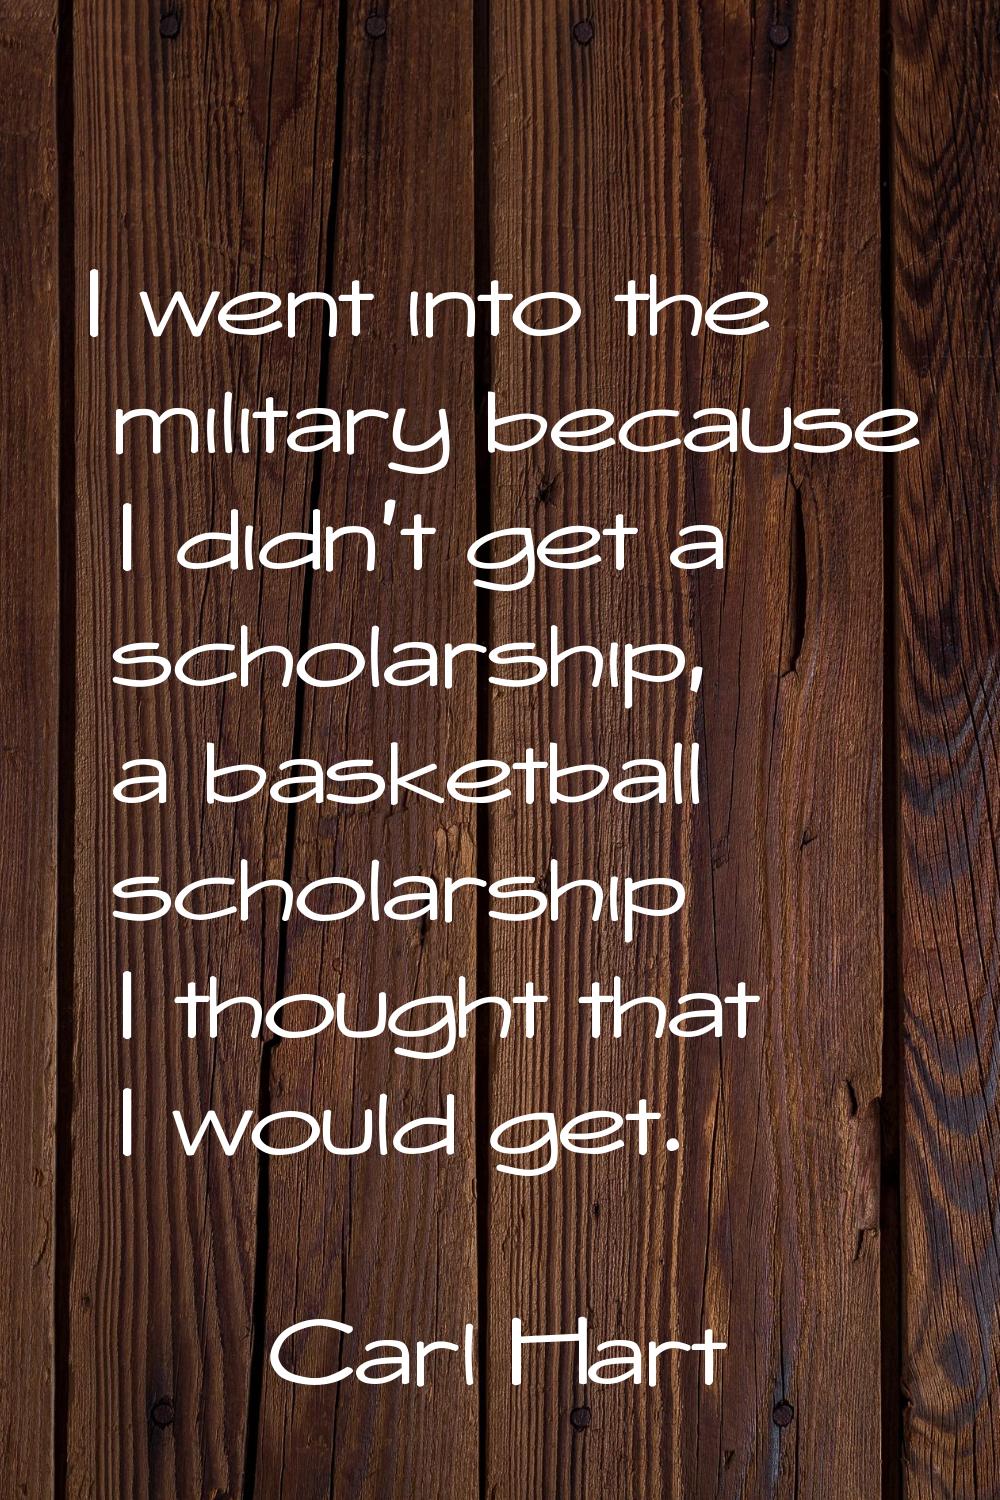 I went into the military because I didn't get a scholarship, a basketball scholarship I thought tha